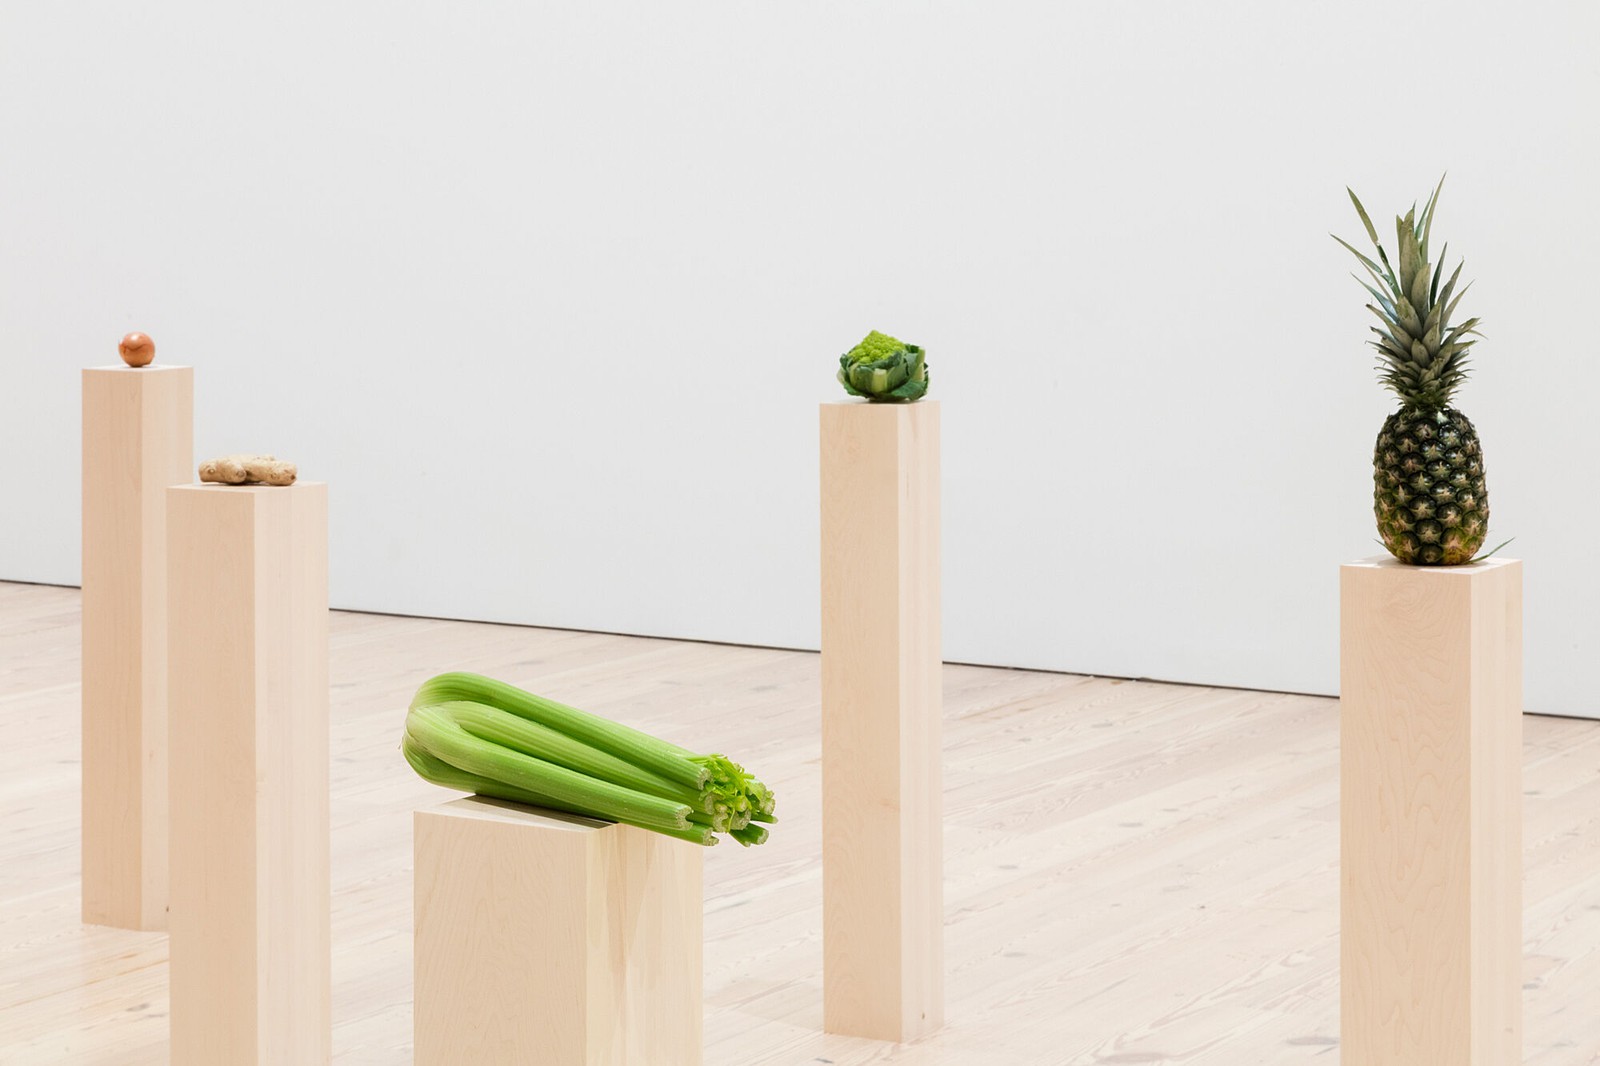 Installation view, fruits, vegetables; fruit and vegetable salad, Whitney Museum of American Art, New York, 2020